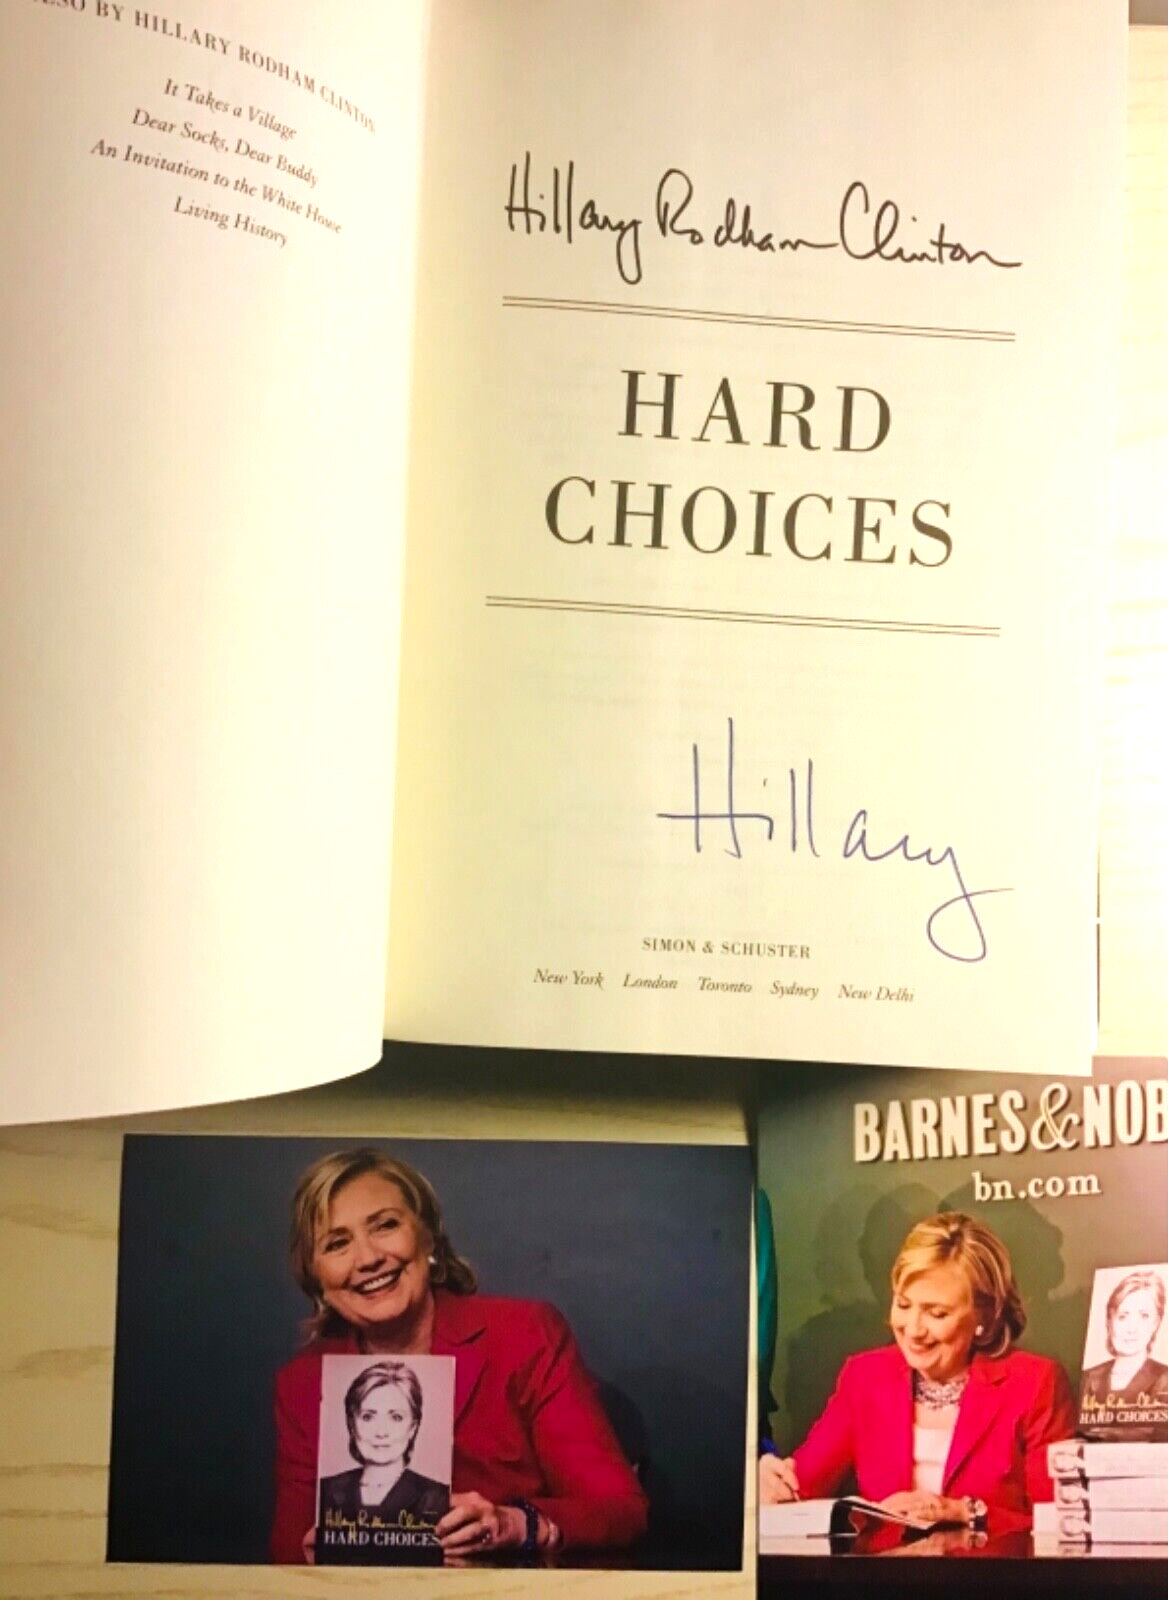 HILLARY RODHAM CLINTON autograph signed Hard Choices Book 1st Edition Hardcover